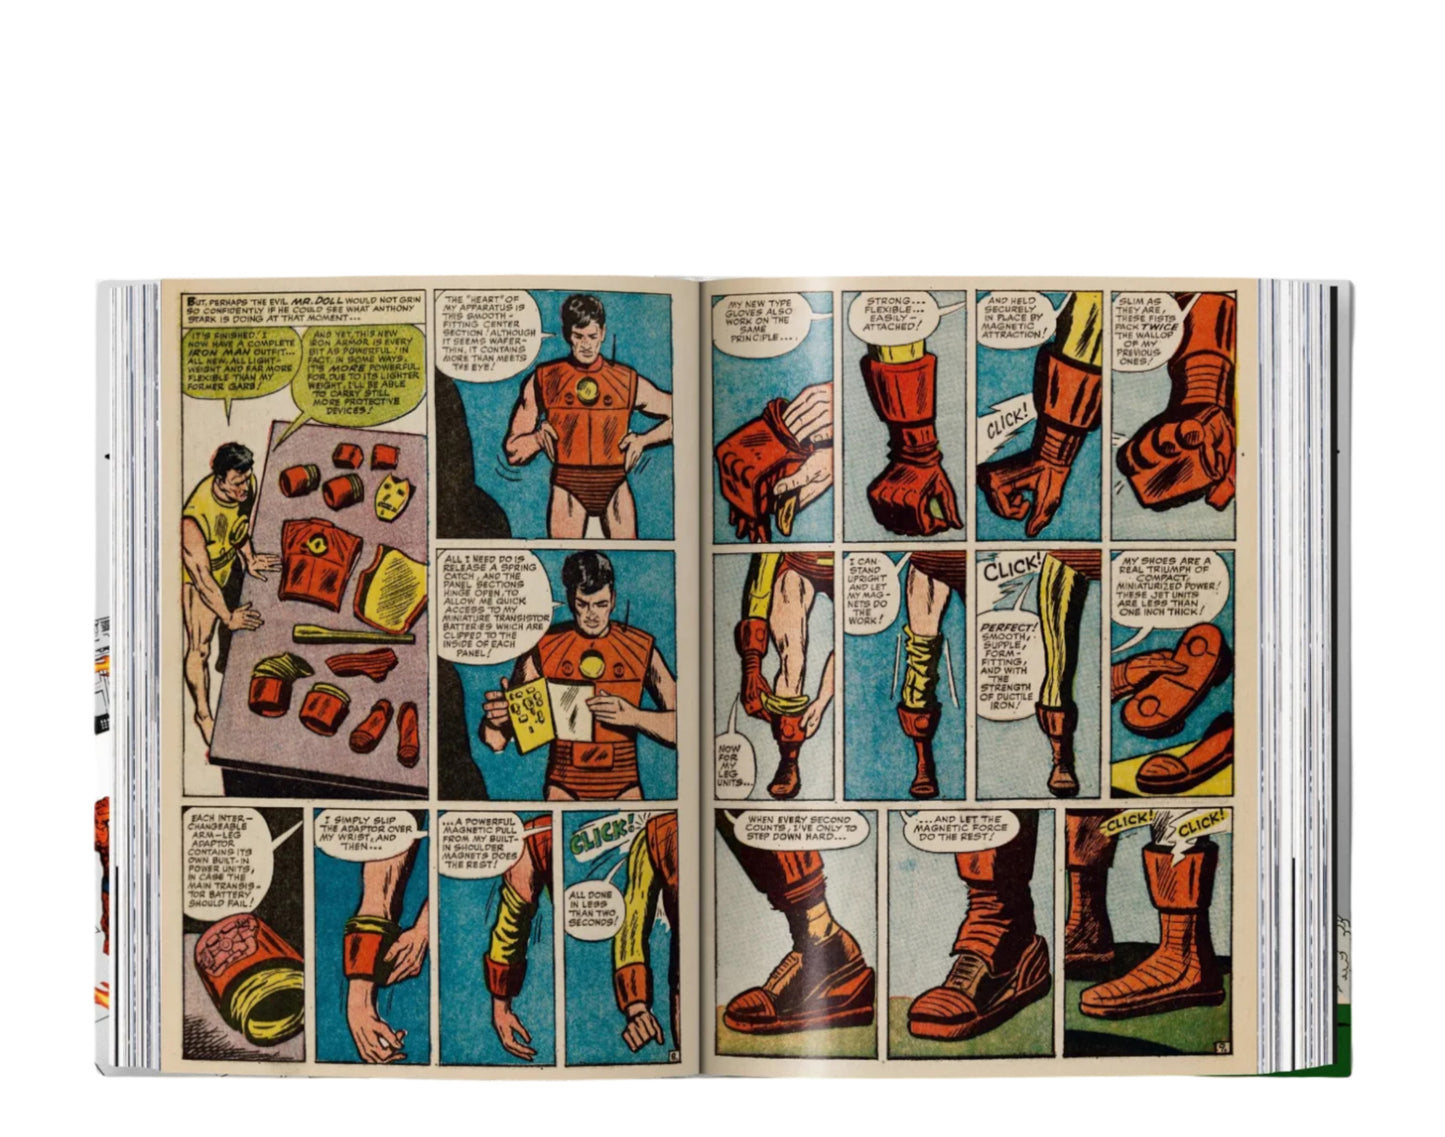 Taschen Books - The Marvel Age of Comics 1961–1978. 40th Anniversary Edition Hardcover Book